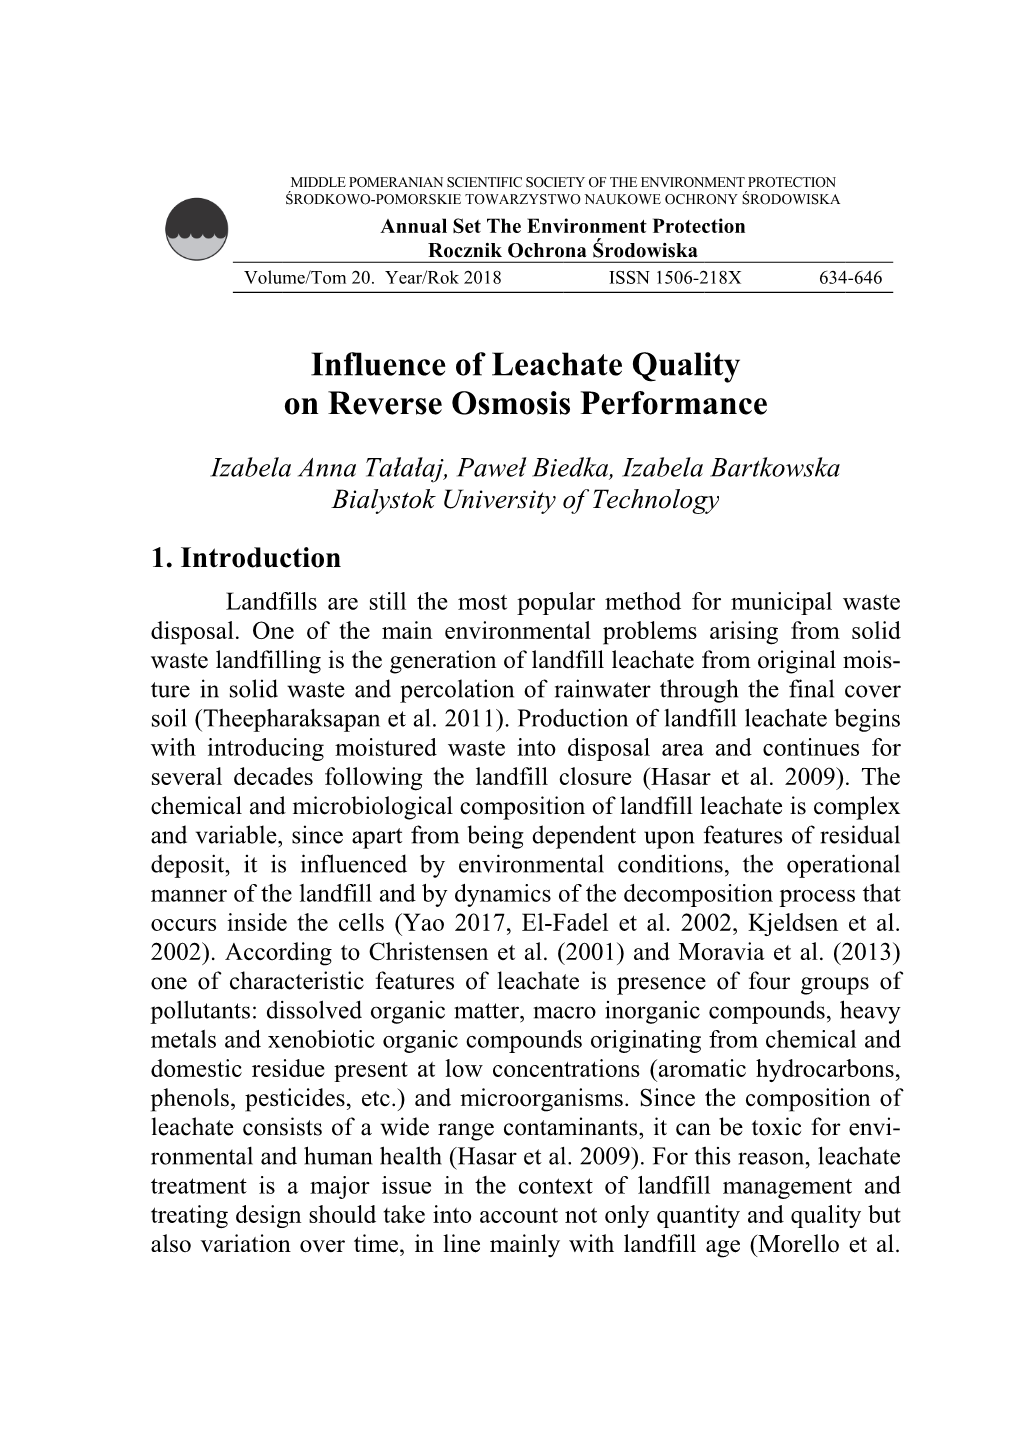 Influence of Leachate Quality on Reverse Osmosis Performance